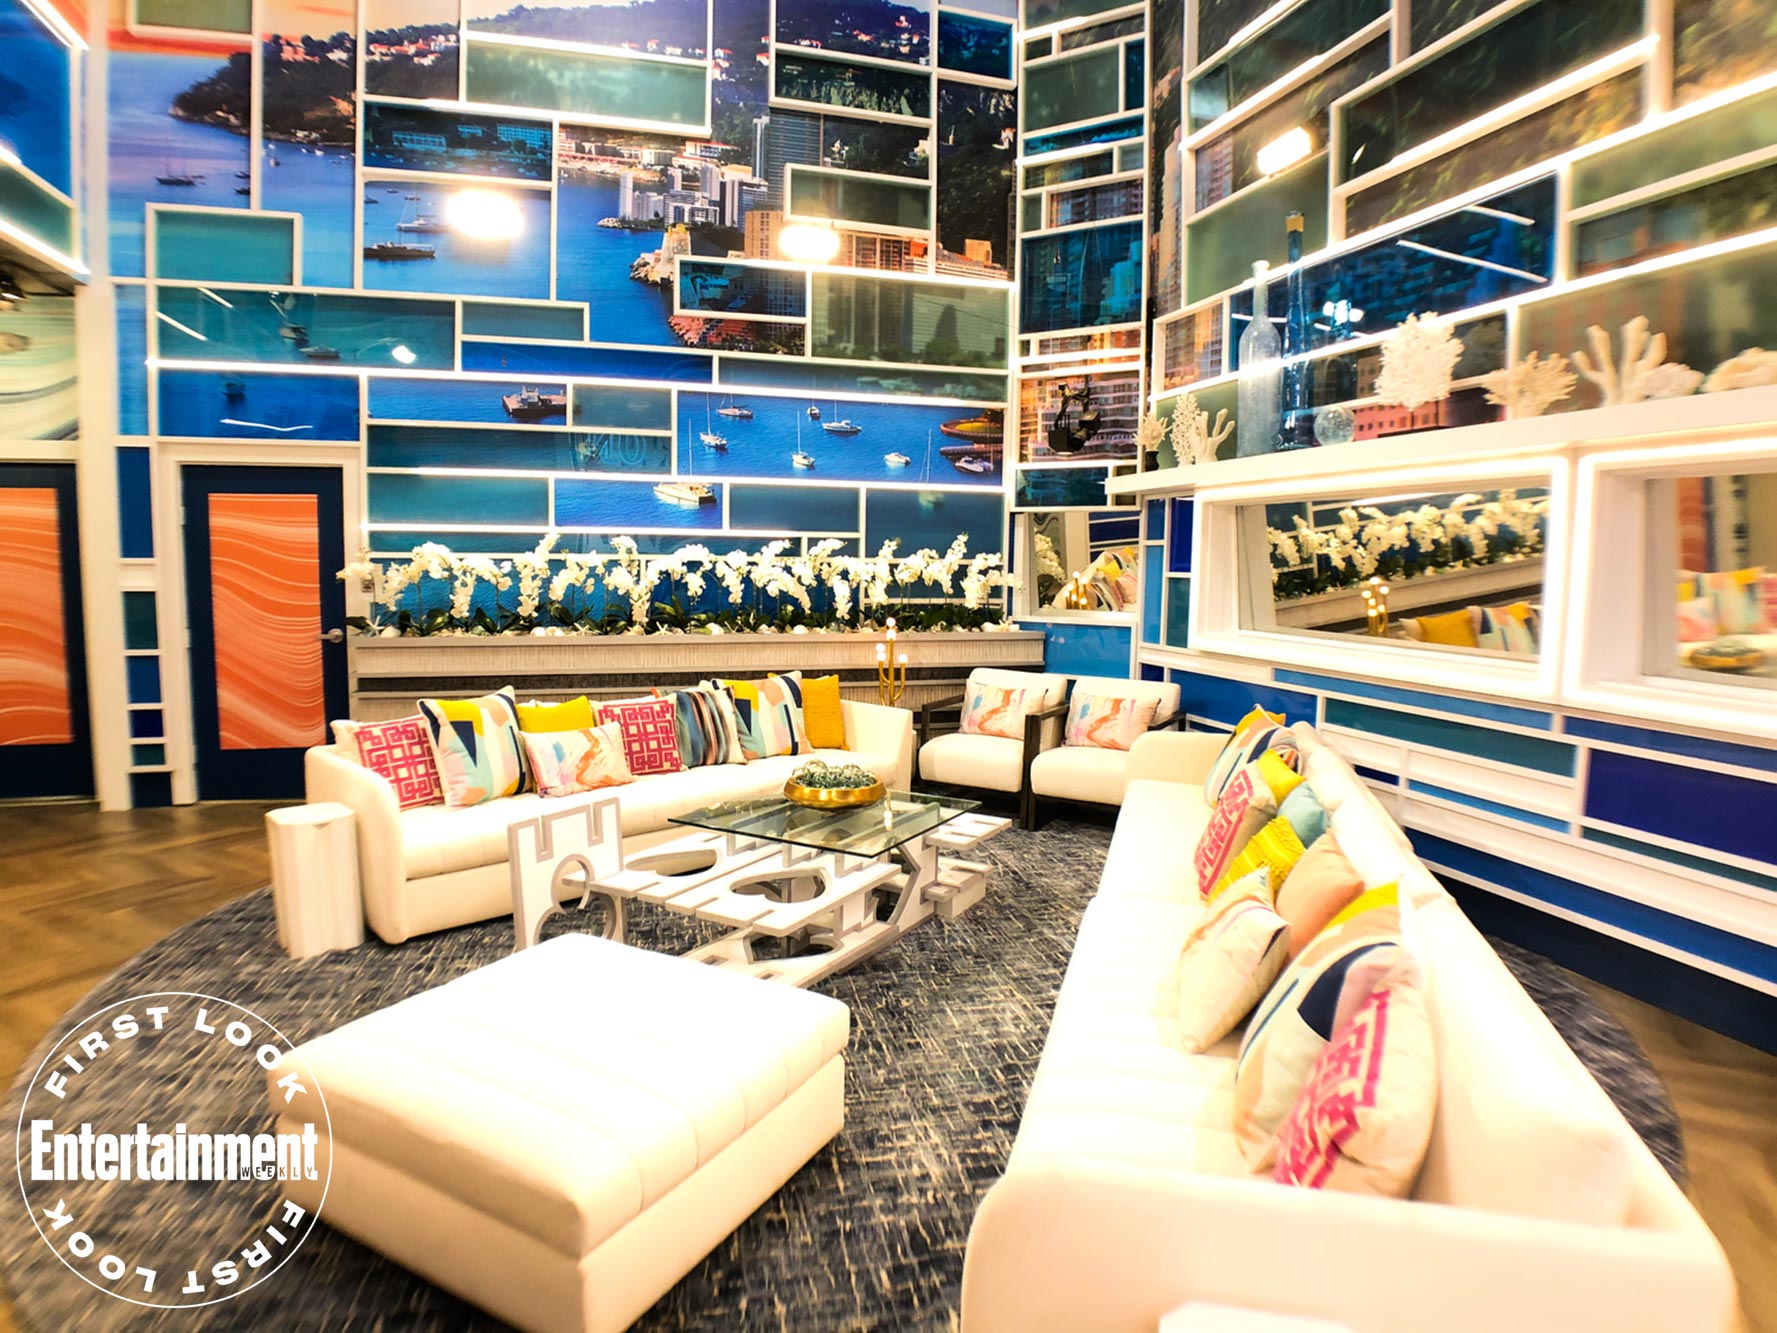 Big Brother 23 House Pictures and Videos